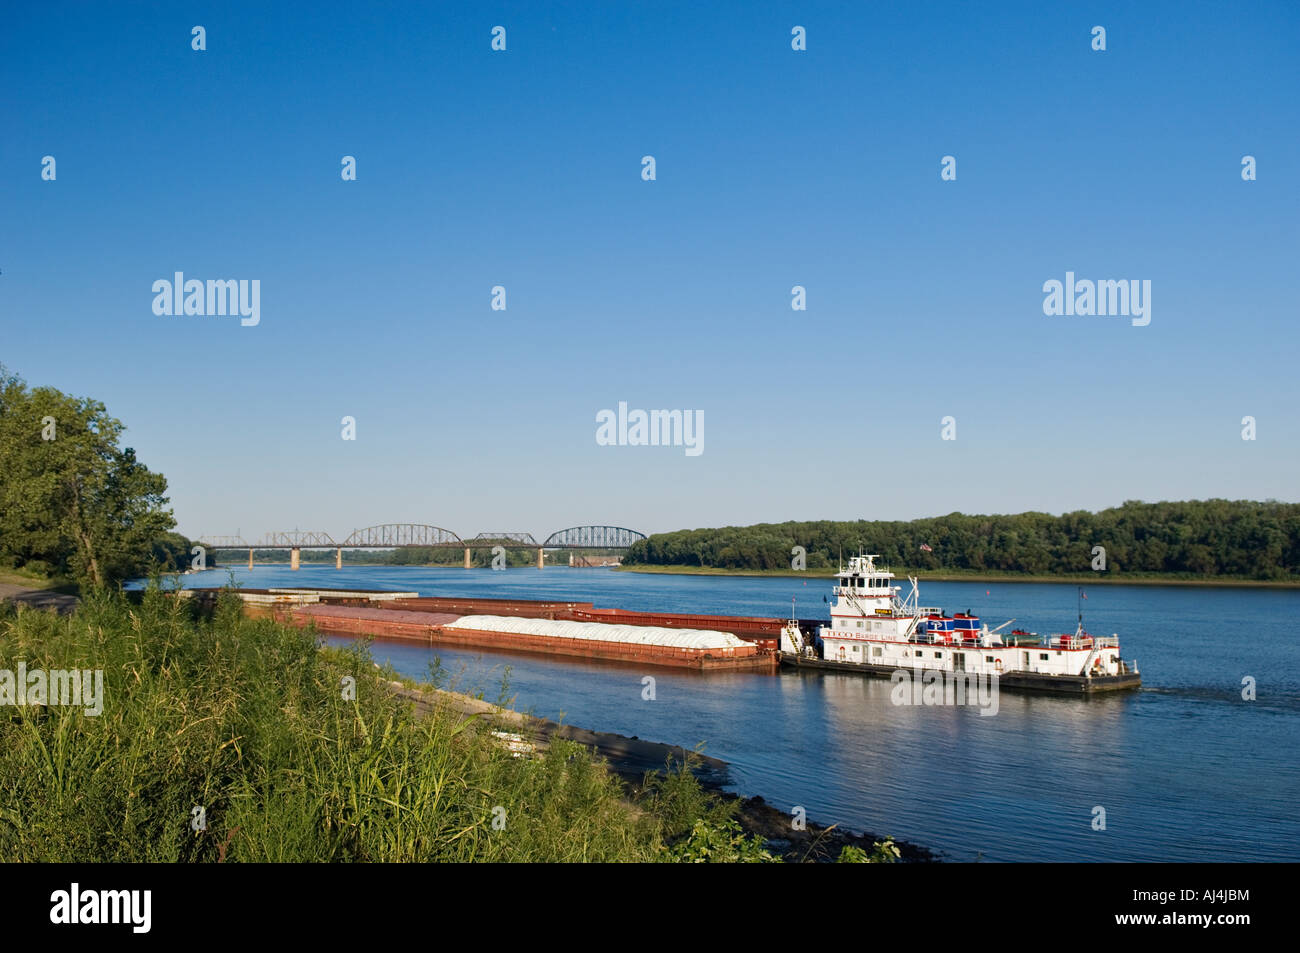 Towboat and Barge on the Ohio River Waiting to Enter the McAlpine Locks New Albany Indiana Stock Photo